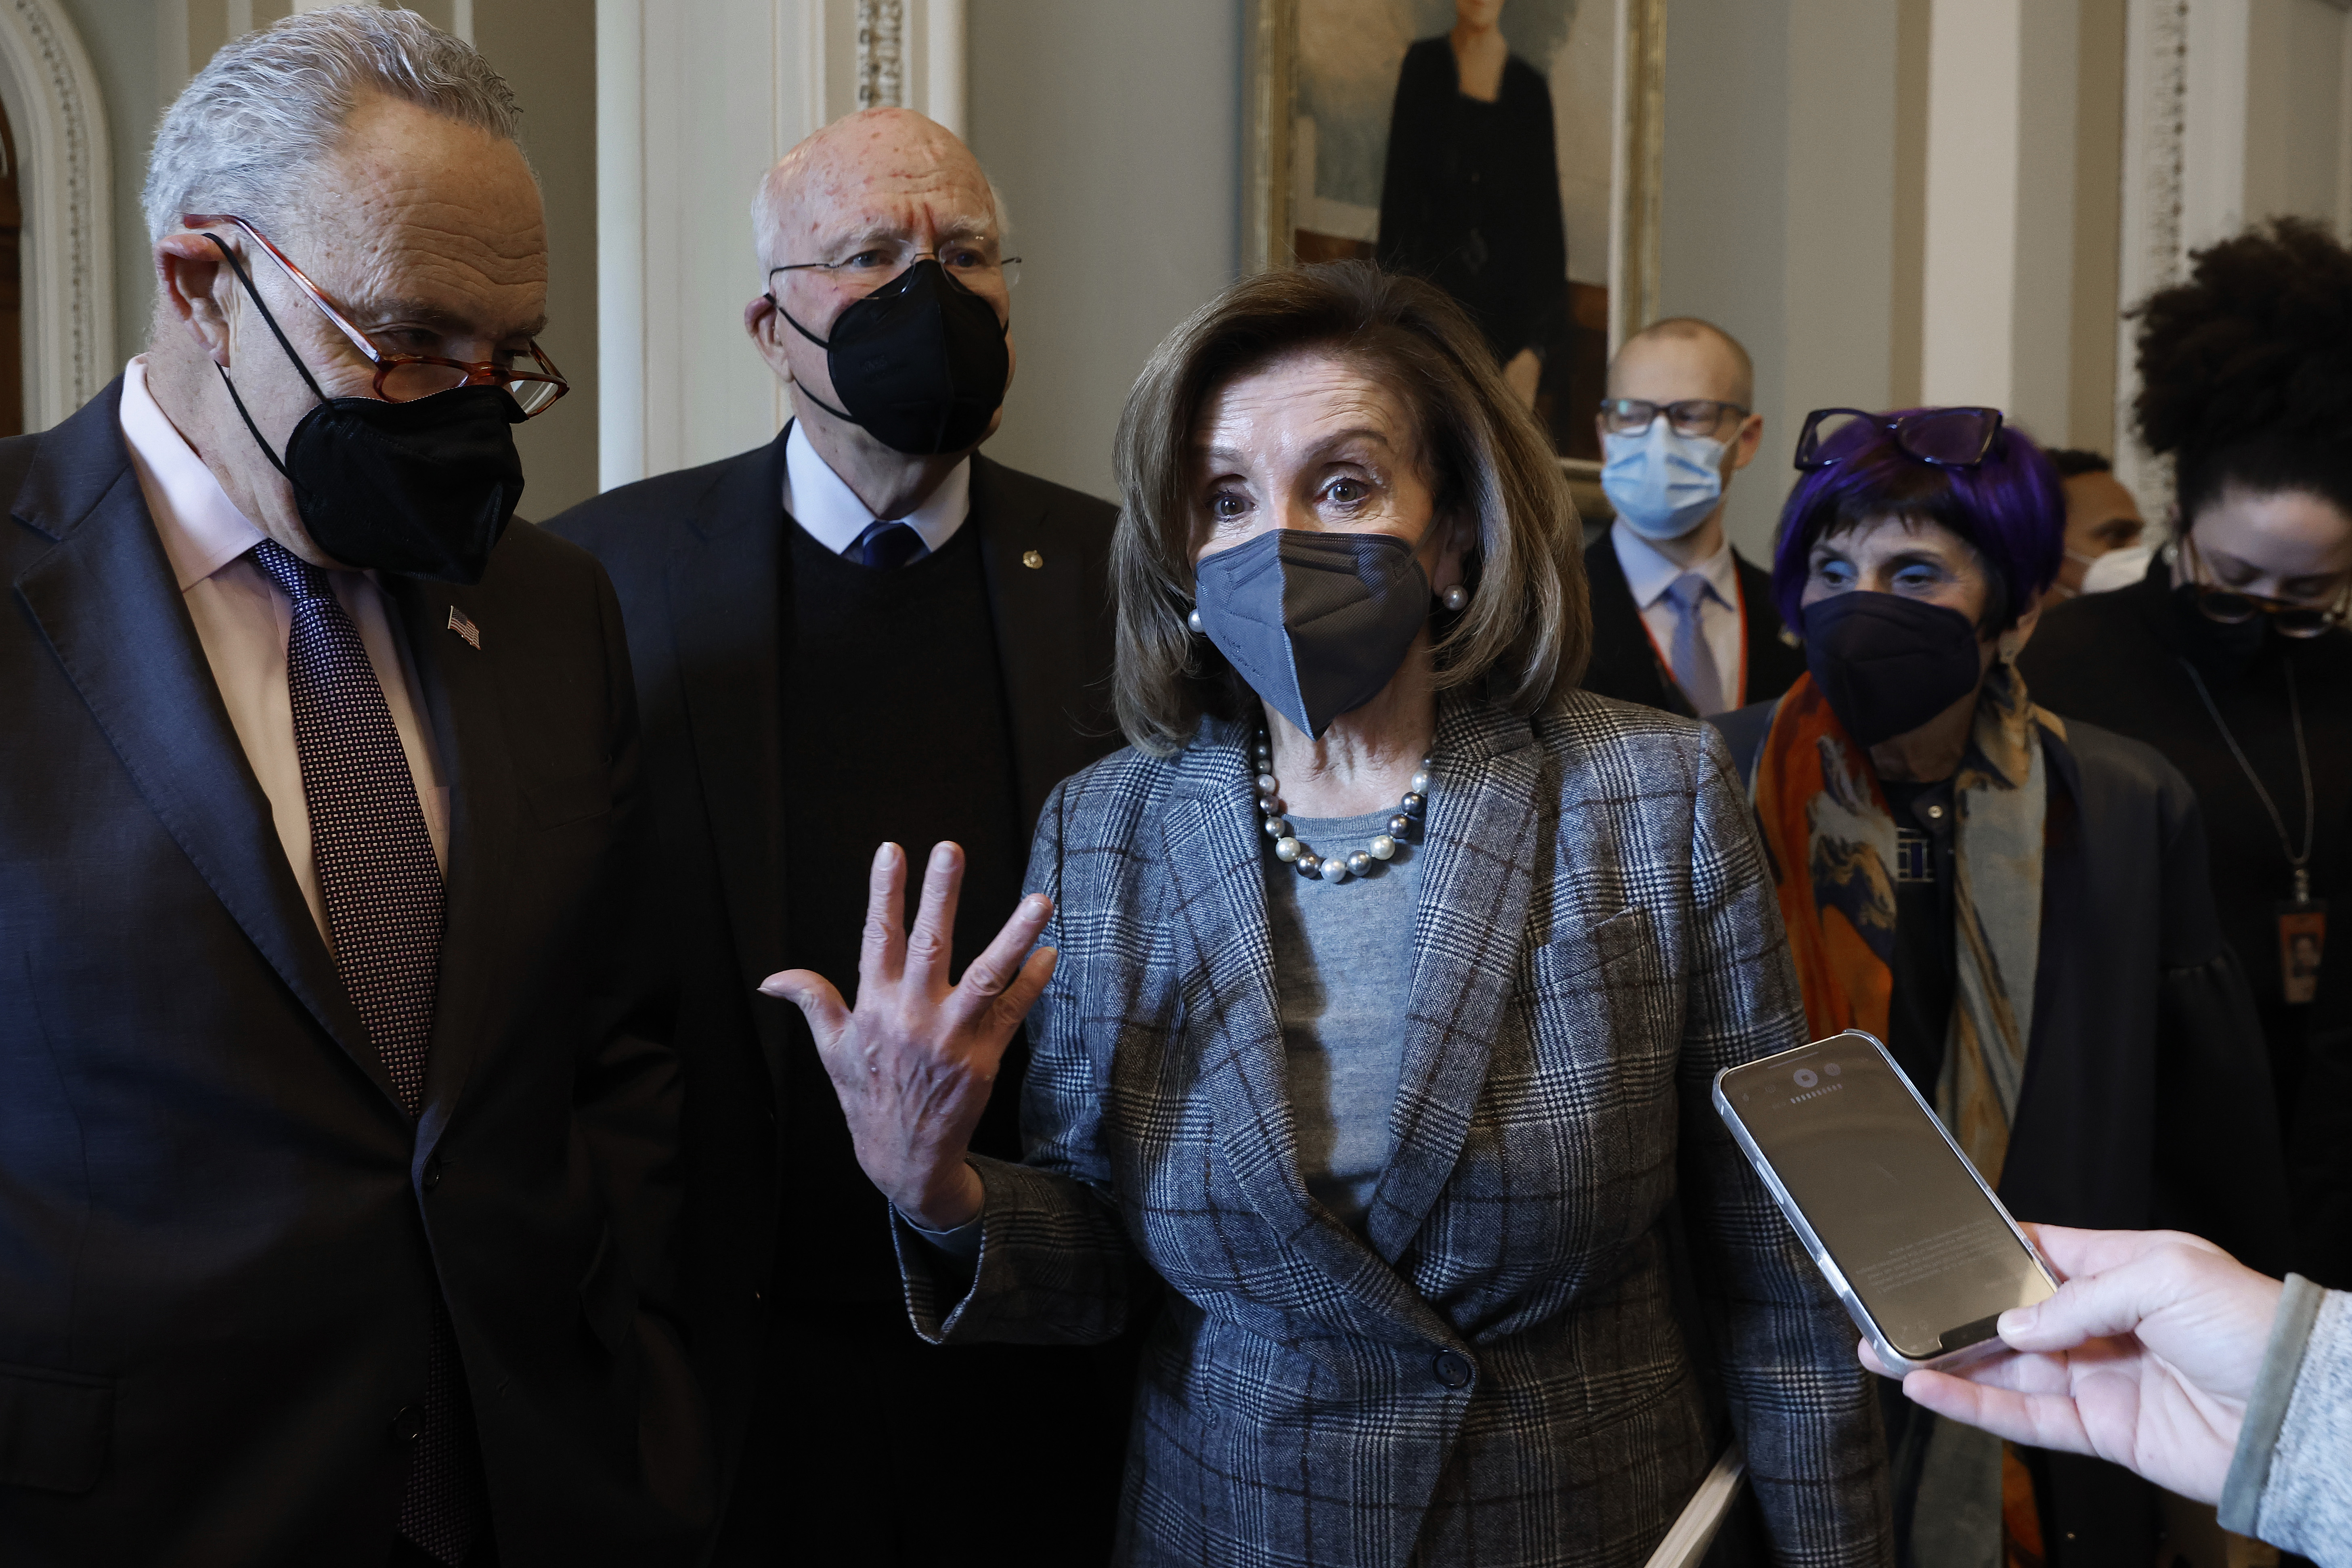 House Speaker Nancy Pelosi, flanked by Senate Majority Leader Chuck Schumer and House and Senate Appropriations Committee chairs, speaks to reporters after a meeting in the US Capitol on February 1, 2022, in Washington, DC.